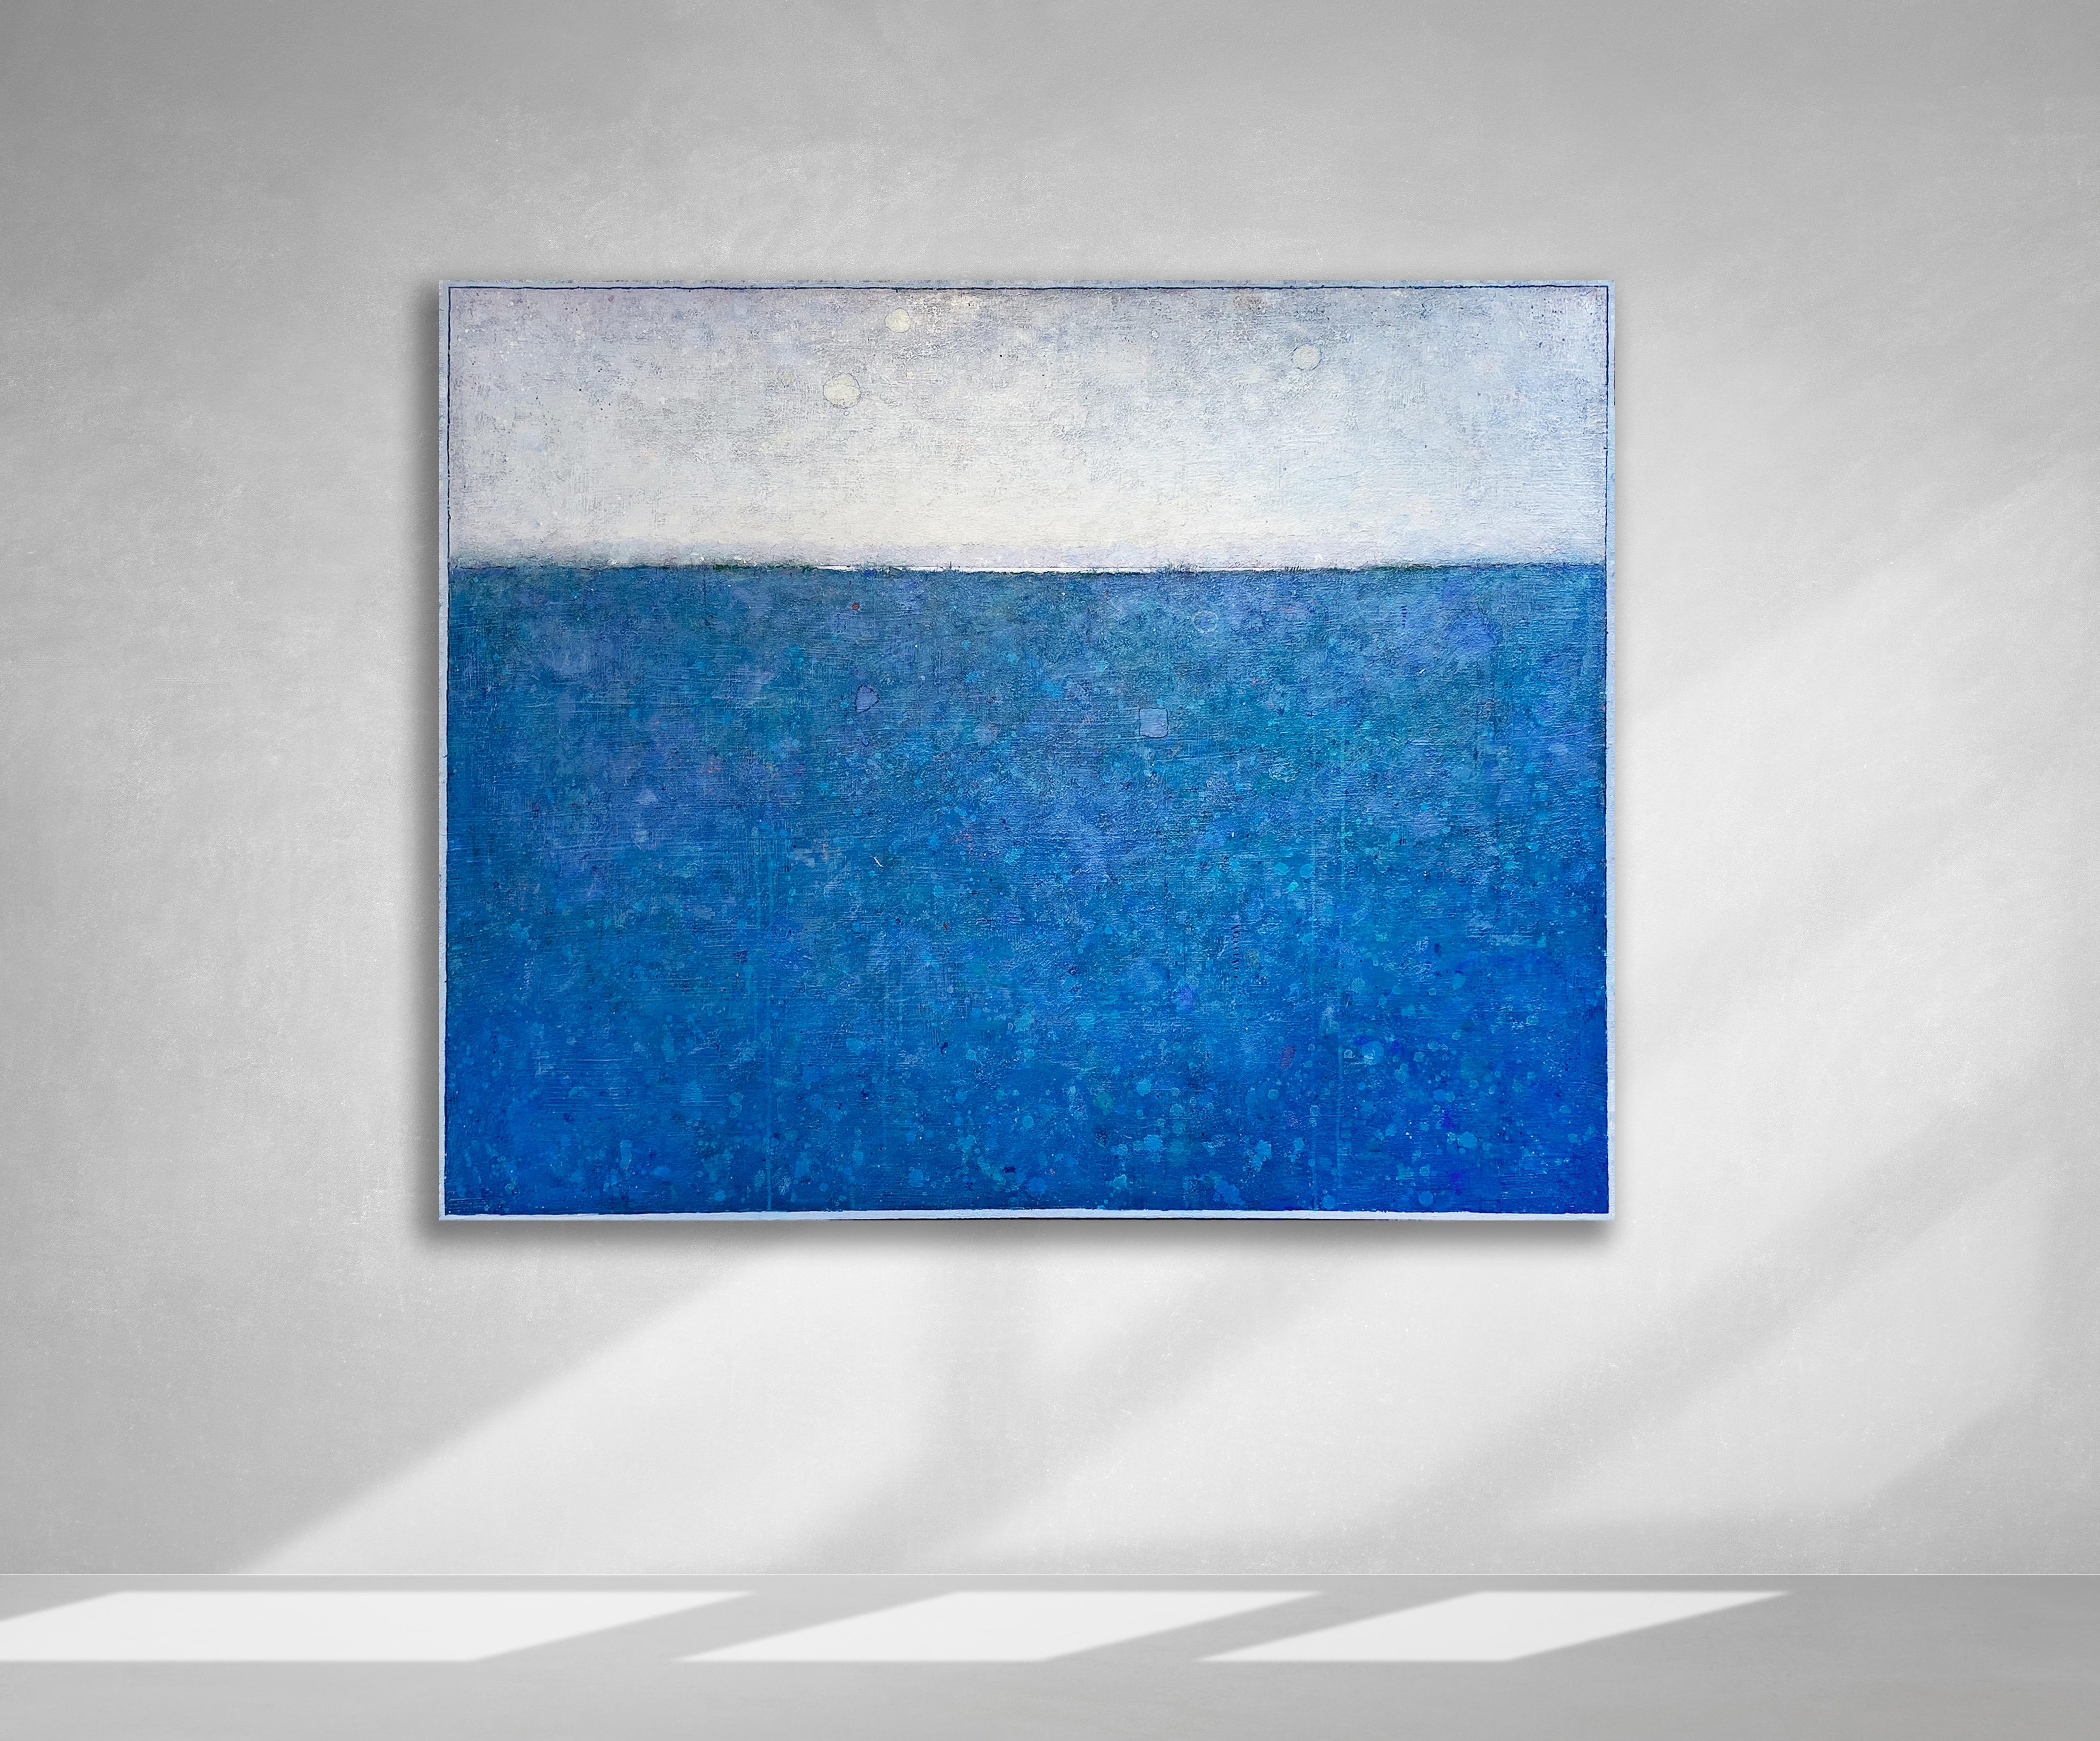 This large-scale statement piece by Elwood Howell is a primarily brilliant blue color with specks and shapes of purple, teal, and green floating throughout. A stark horizon line is dark on the sides with white at the center, and the "sky" above the